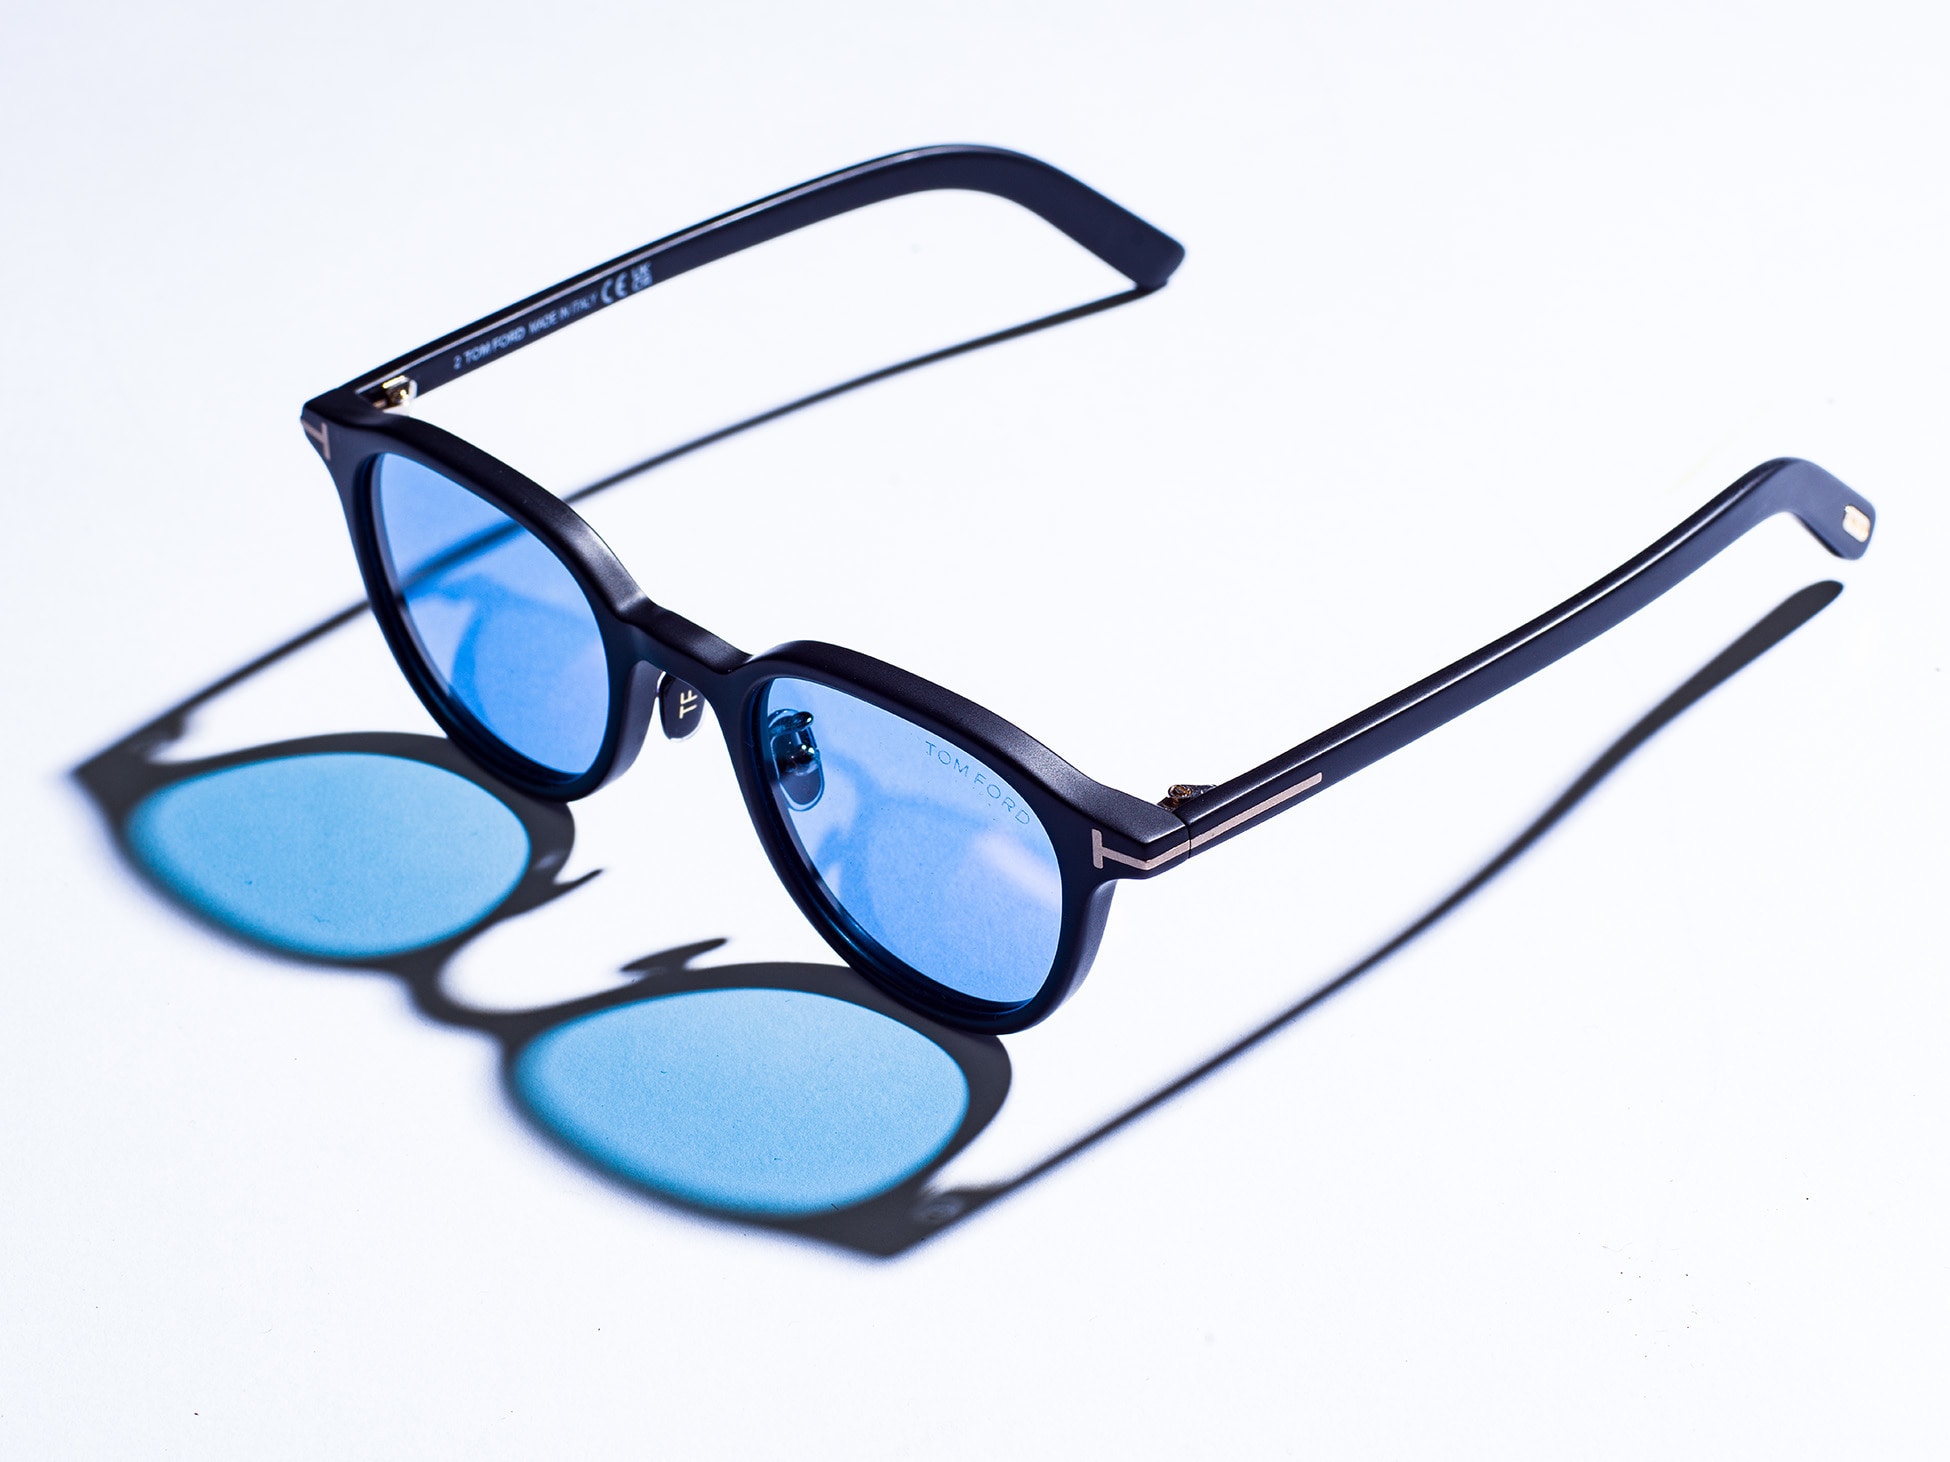 TOM FORD EYEWEAR Exclusive for Ron Herman 7.16(Sat) New Arrival